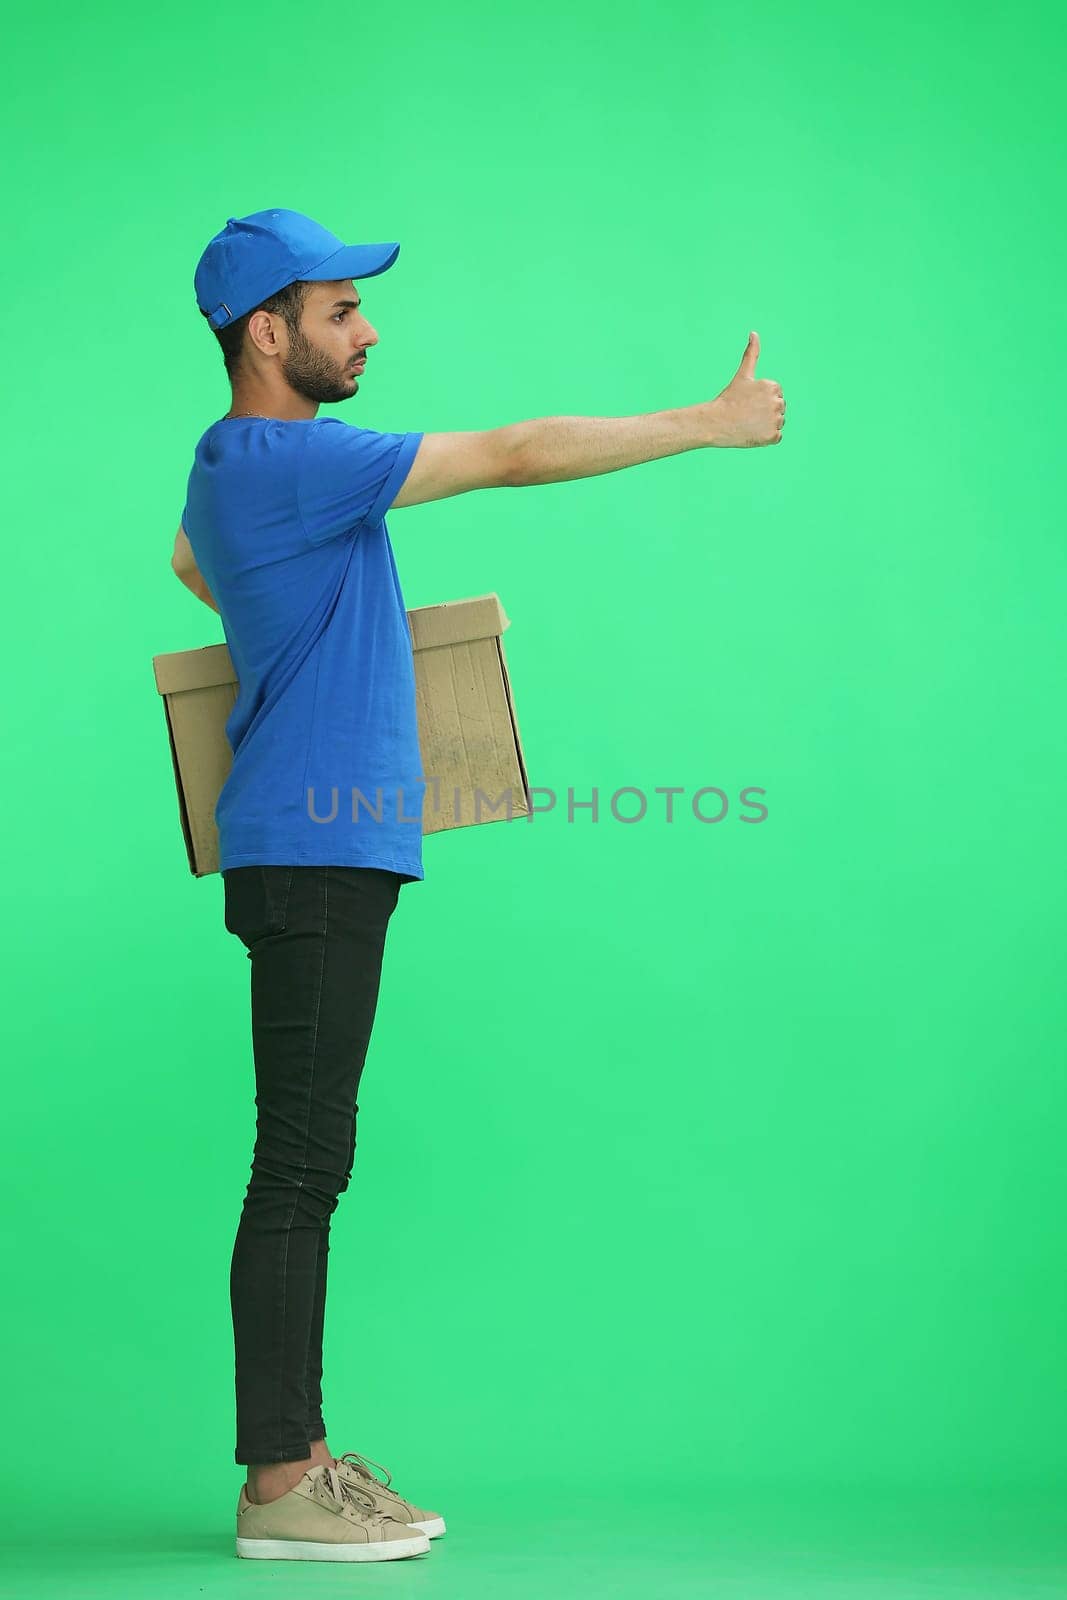 A man on a green background with box. Shows thumbs up sign, in profile.